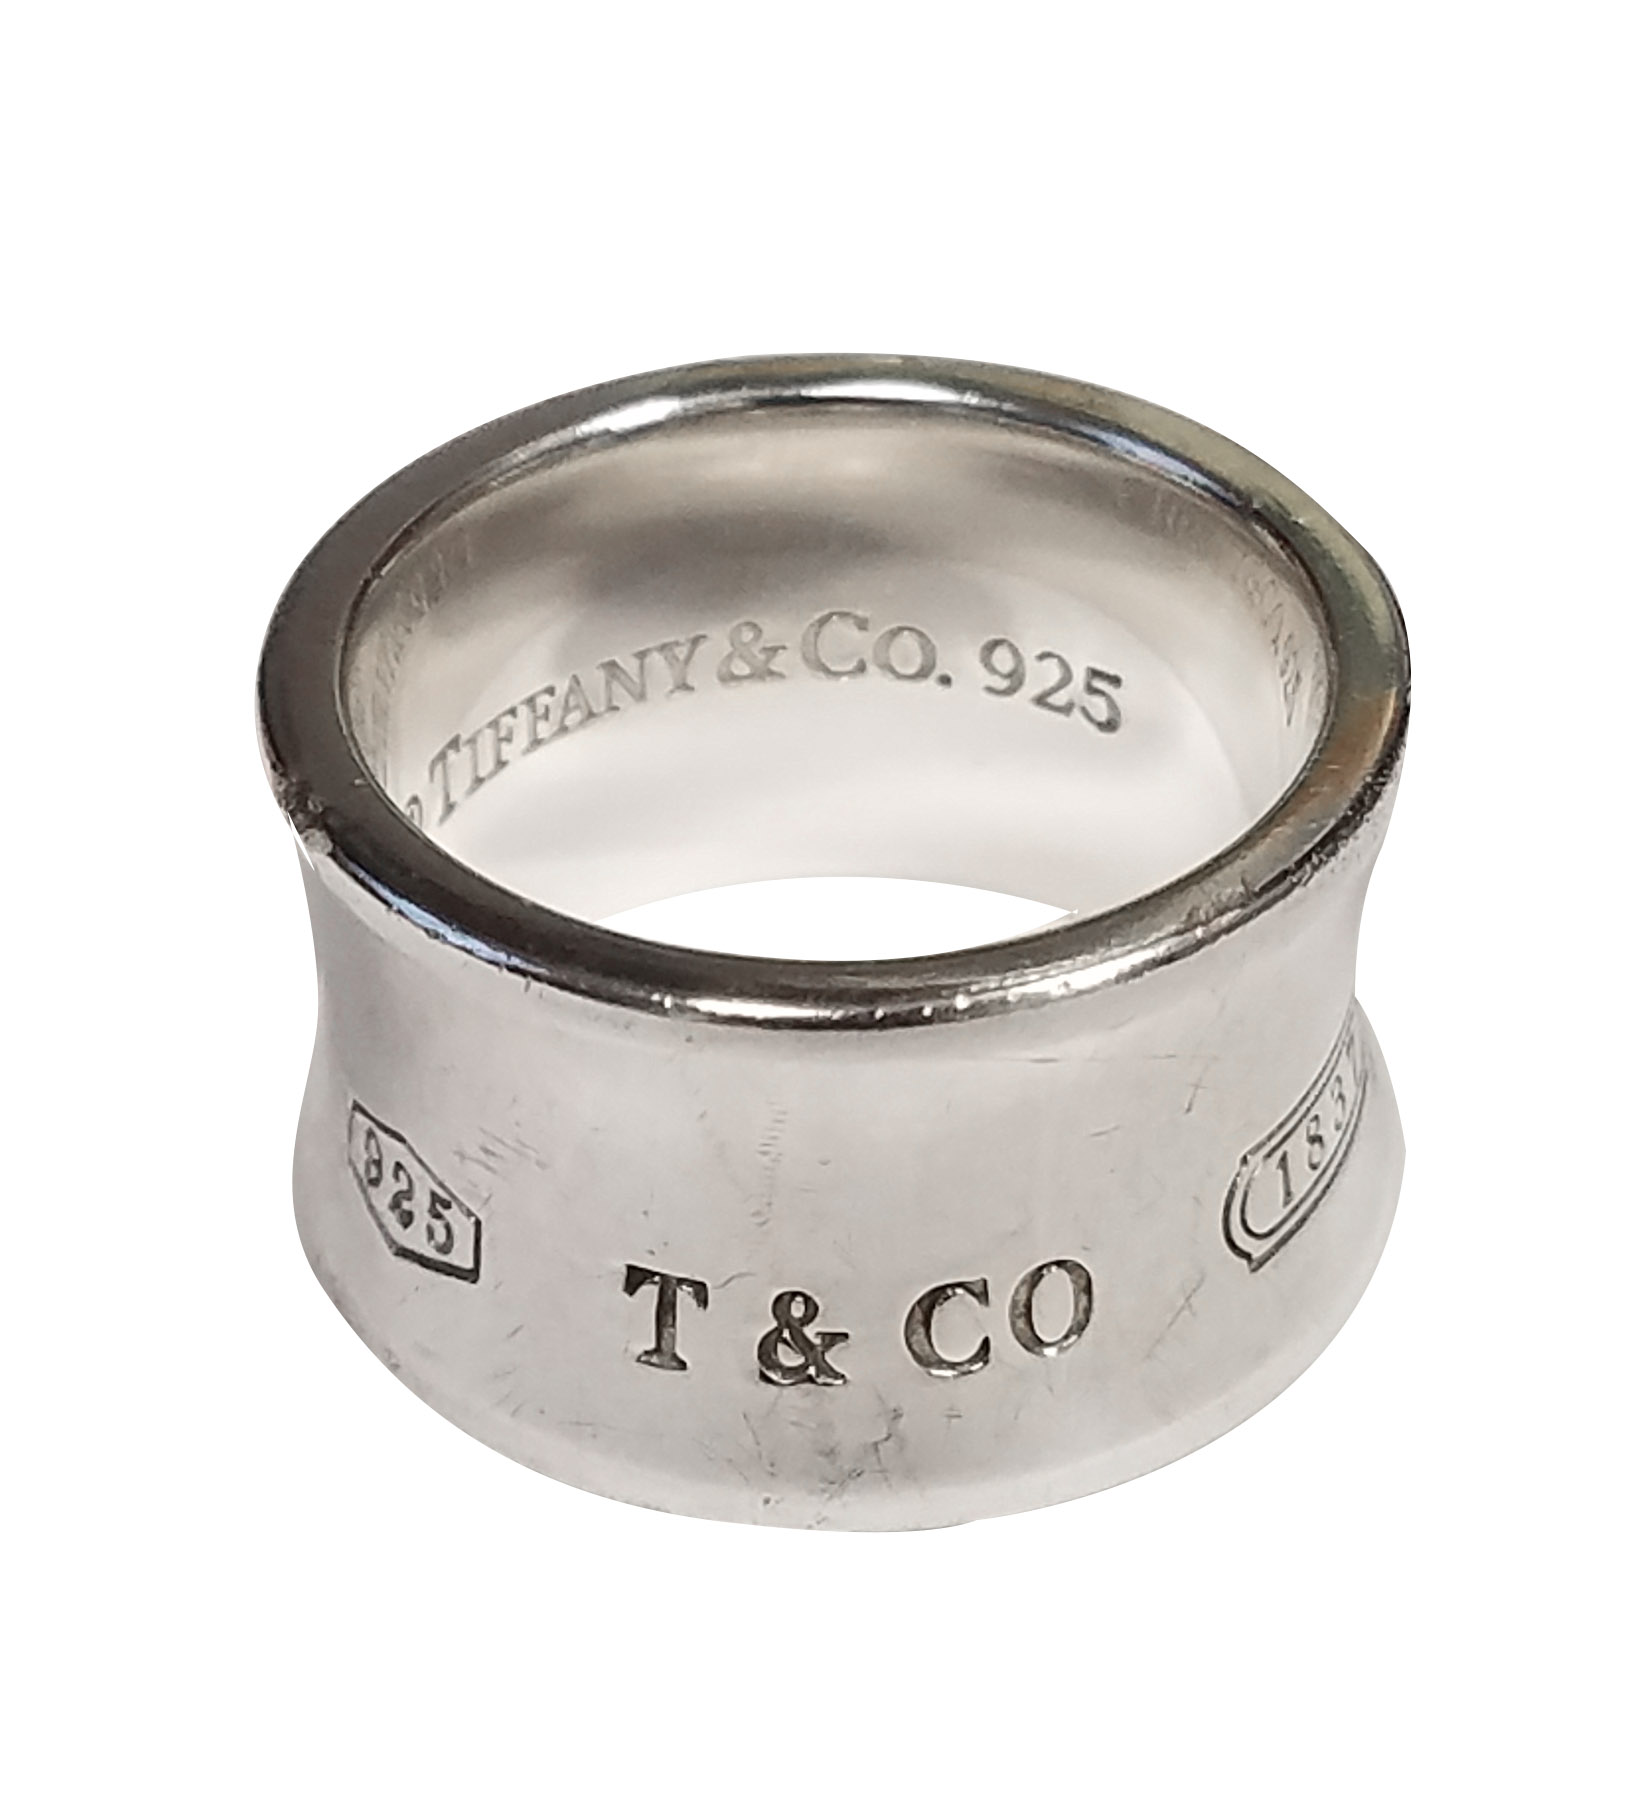 Co. 925 Sterling Silver Wide Ring Size 